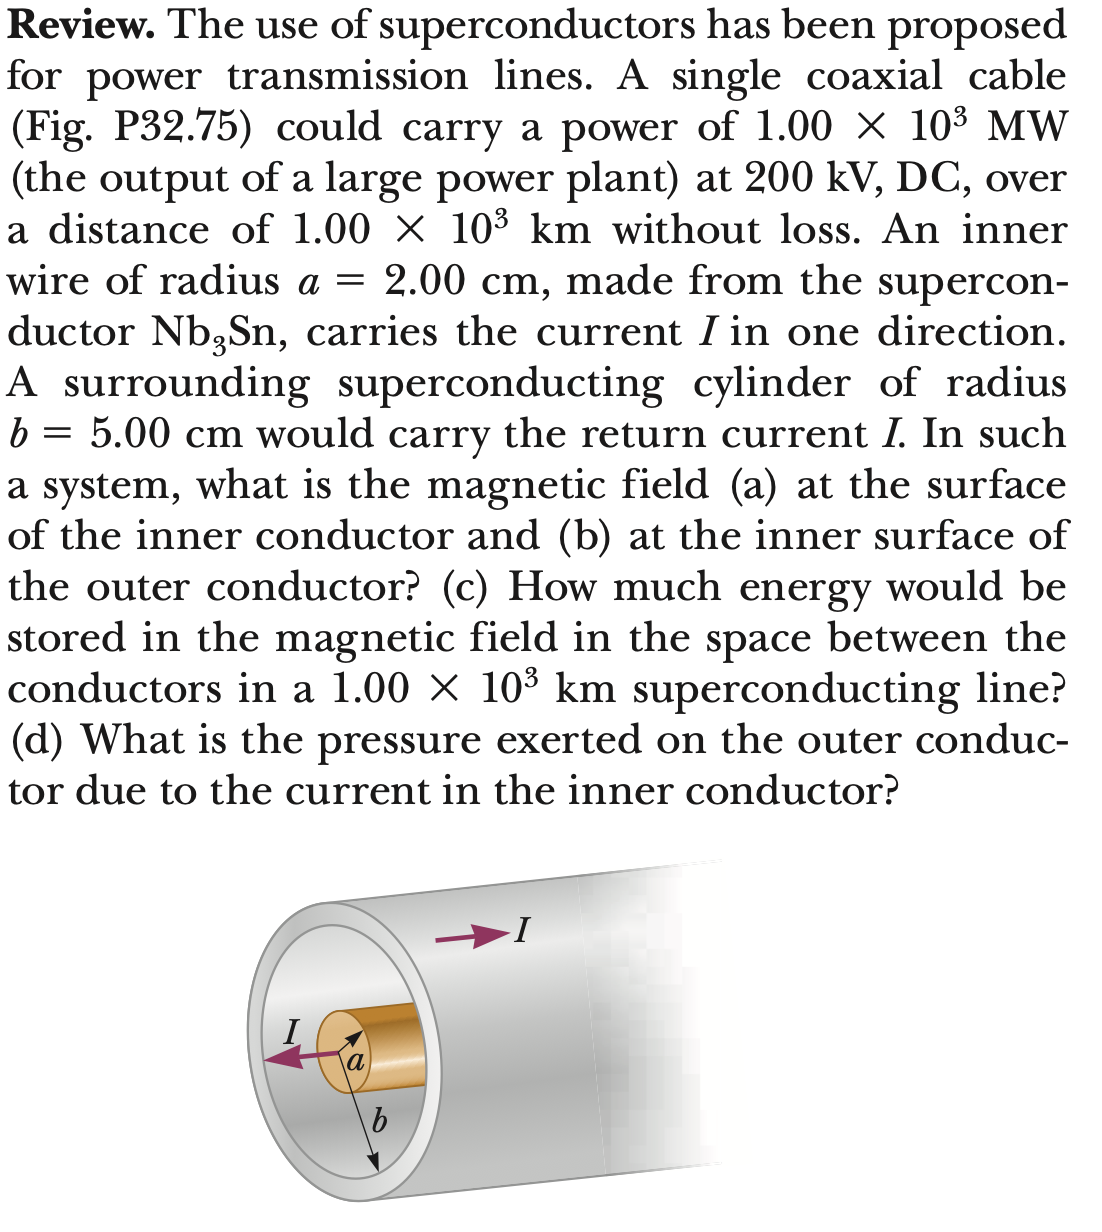 Review. The use of superconductors has been proposed
for power transmission lines. A single coaxial cable
(Fig. P32.75) could carry a power of 1.00 × 10³ MW
(the output of a large power plant) at 200 kV, DC, over
a distance of 1.00 × 10³ km without loss. An inner
wire of radius a = 2.00 cm, made from the supercon-
ductor Nb, Sn, carries the current I in one direction.
A surrounding superconducting cylinder of radius
5.00 cm would carry the return current I. In such
a system, what is the magnetic field (a) at the surface
of the inner conductor and (b) at the inner surface of
the outer conductor? (c) How much energy would be
stored in the magnetic field in the space between the
conductors in a 1.00 × 10³ km superconducting line?
(d) What is the pressure exerted on the outer conduc-
tor due to the current in the inner conductor?
b
=
I
b
I